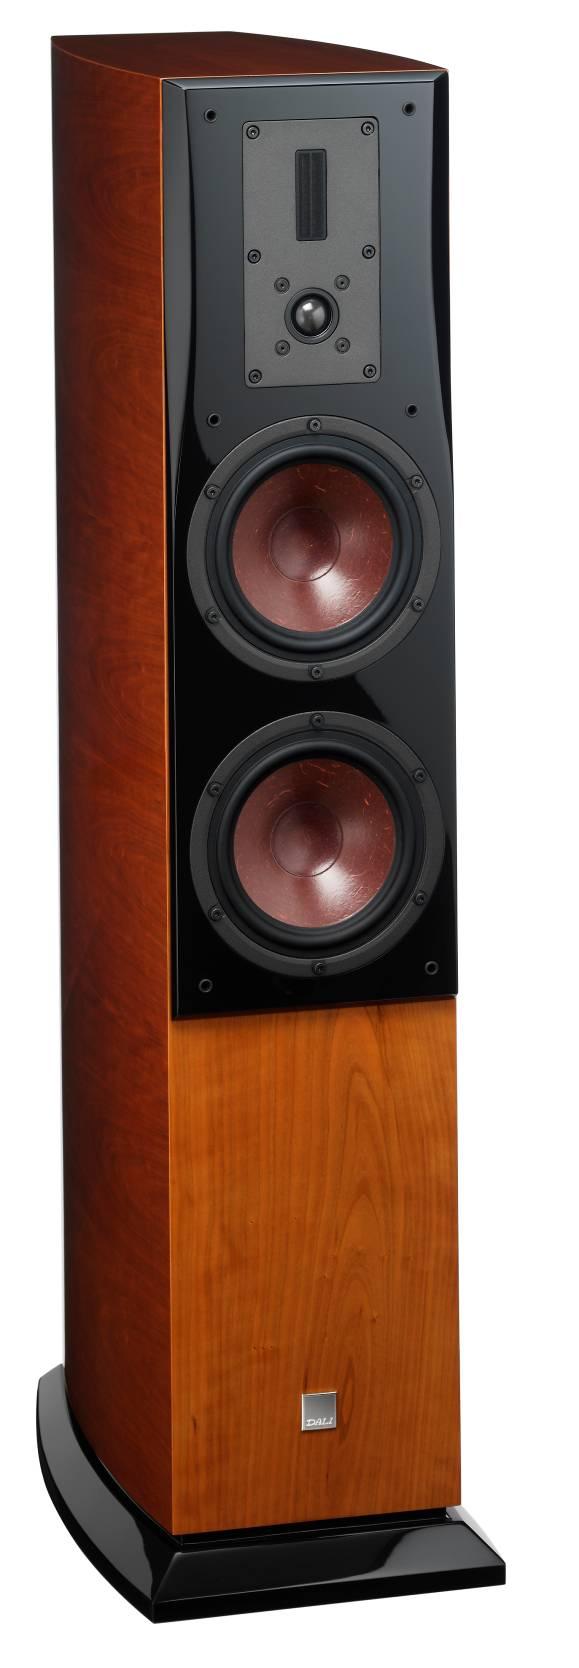 Introduction HELICON is the name of a series of loudspeakers from DALI which has inherited a great deal of technology and technical features from the DALI premium series, DALI EUPHONIA.